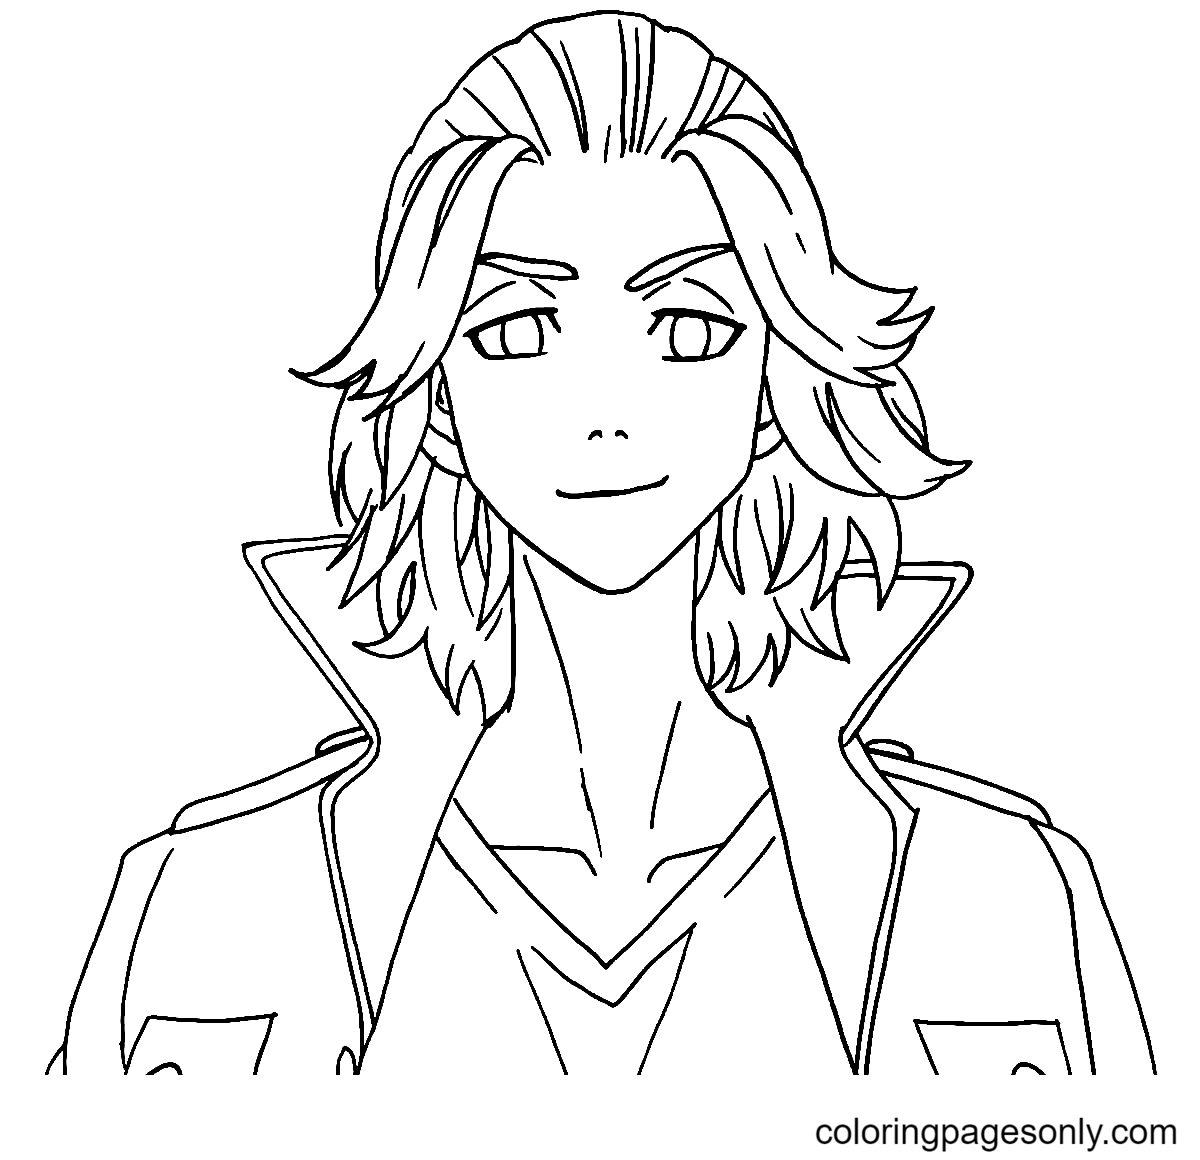 Manjiro Sano (Mikey) Coloring Pages